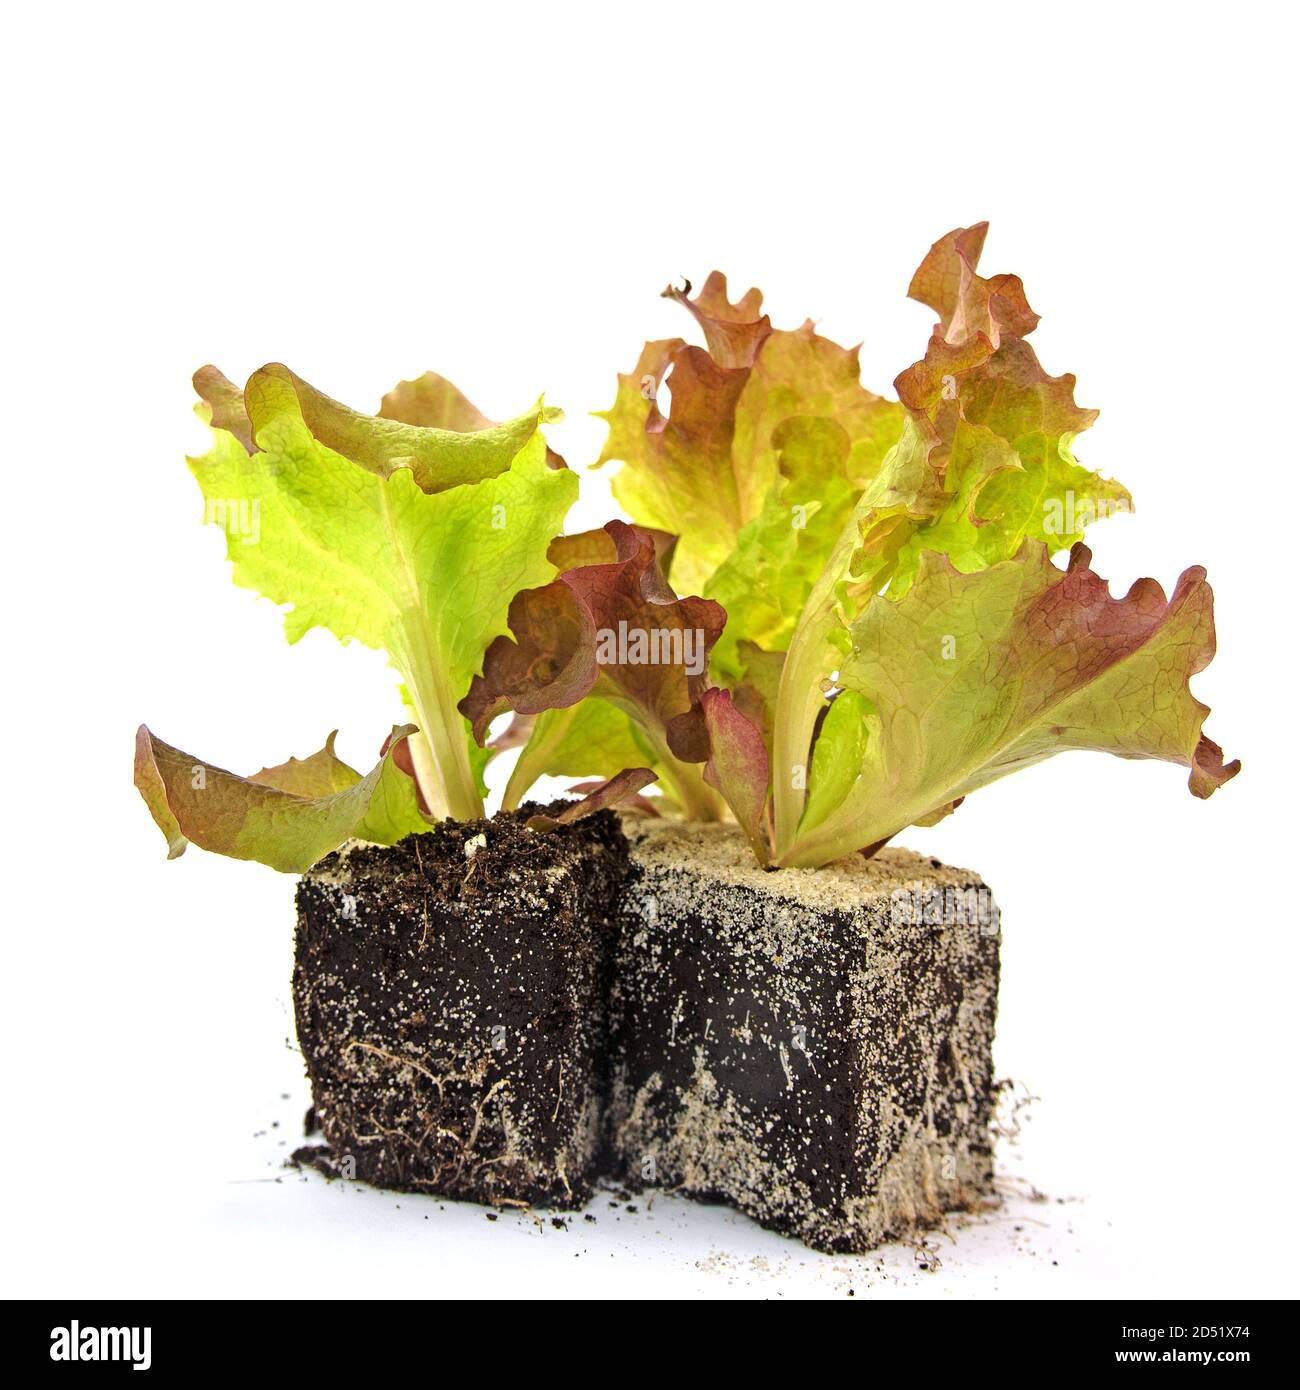 Pick lettuce, young plants against a white background Stock Photo